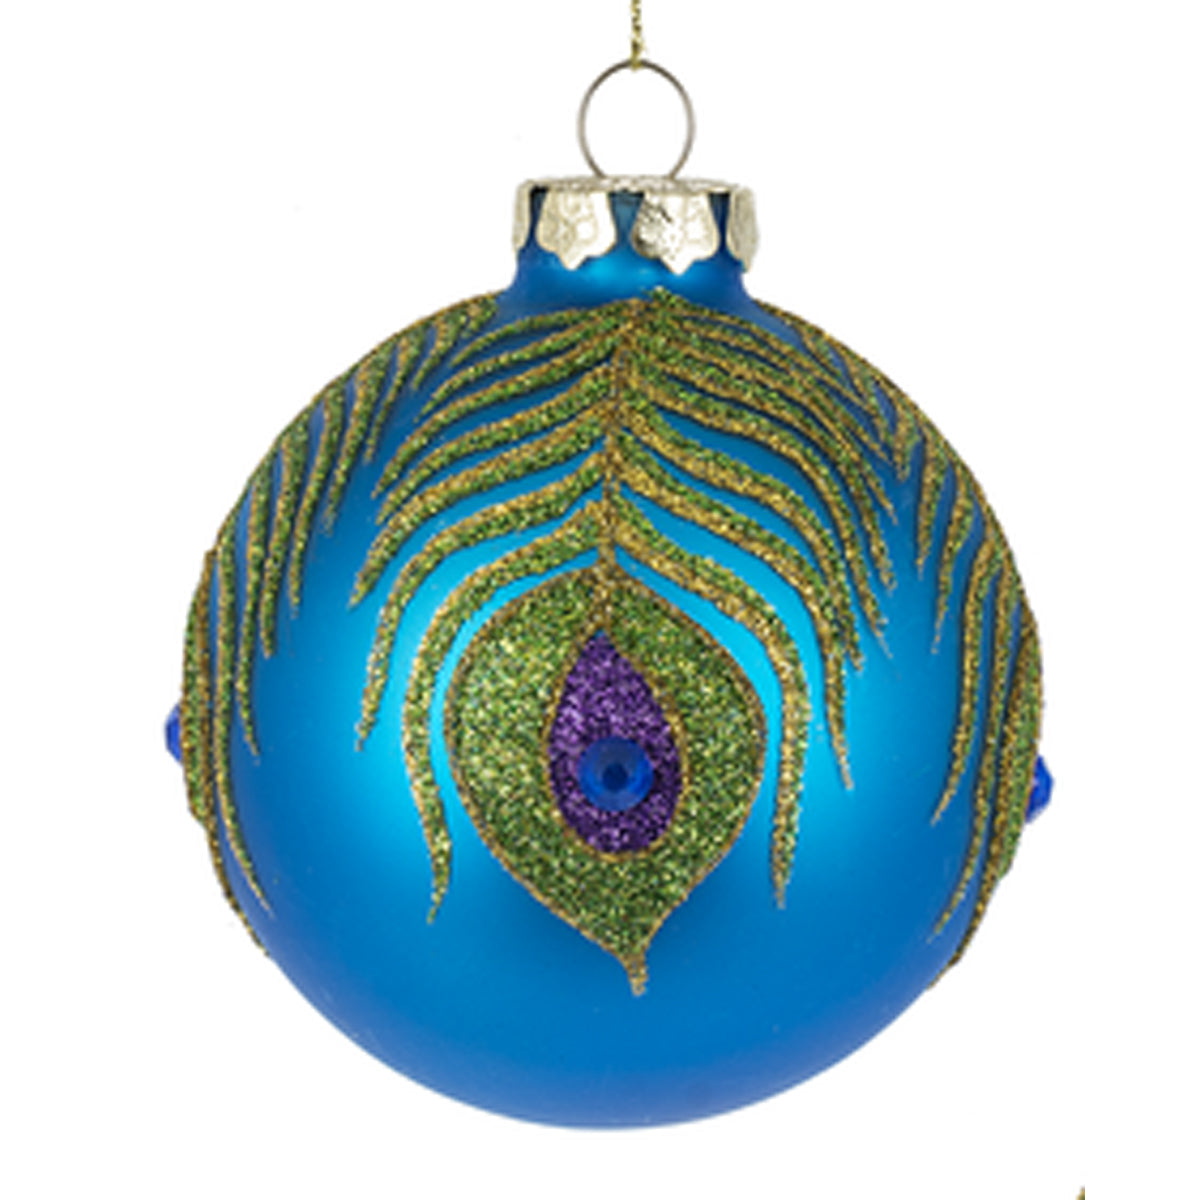 Midwest 153233 2 Glass Peacock Feather Ball Hanging Ornaments 1 Green and 1 Blue 3.125 inch Diameter